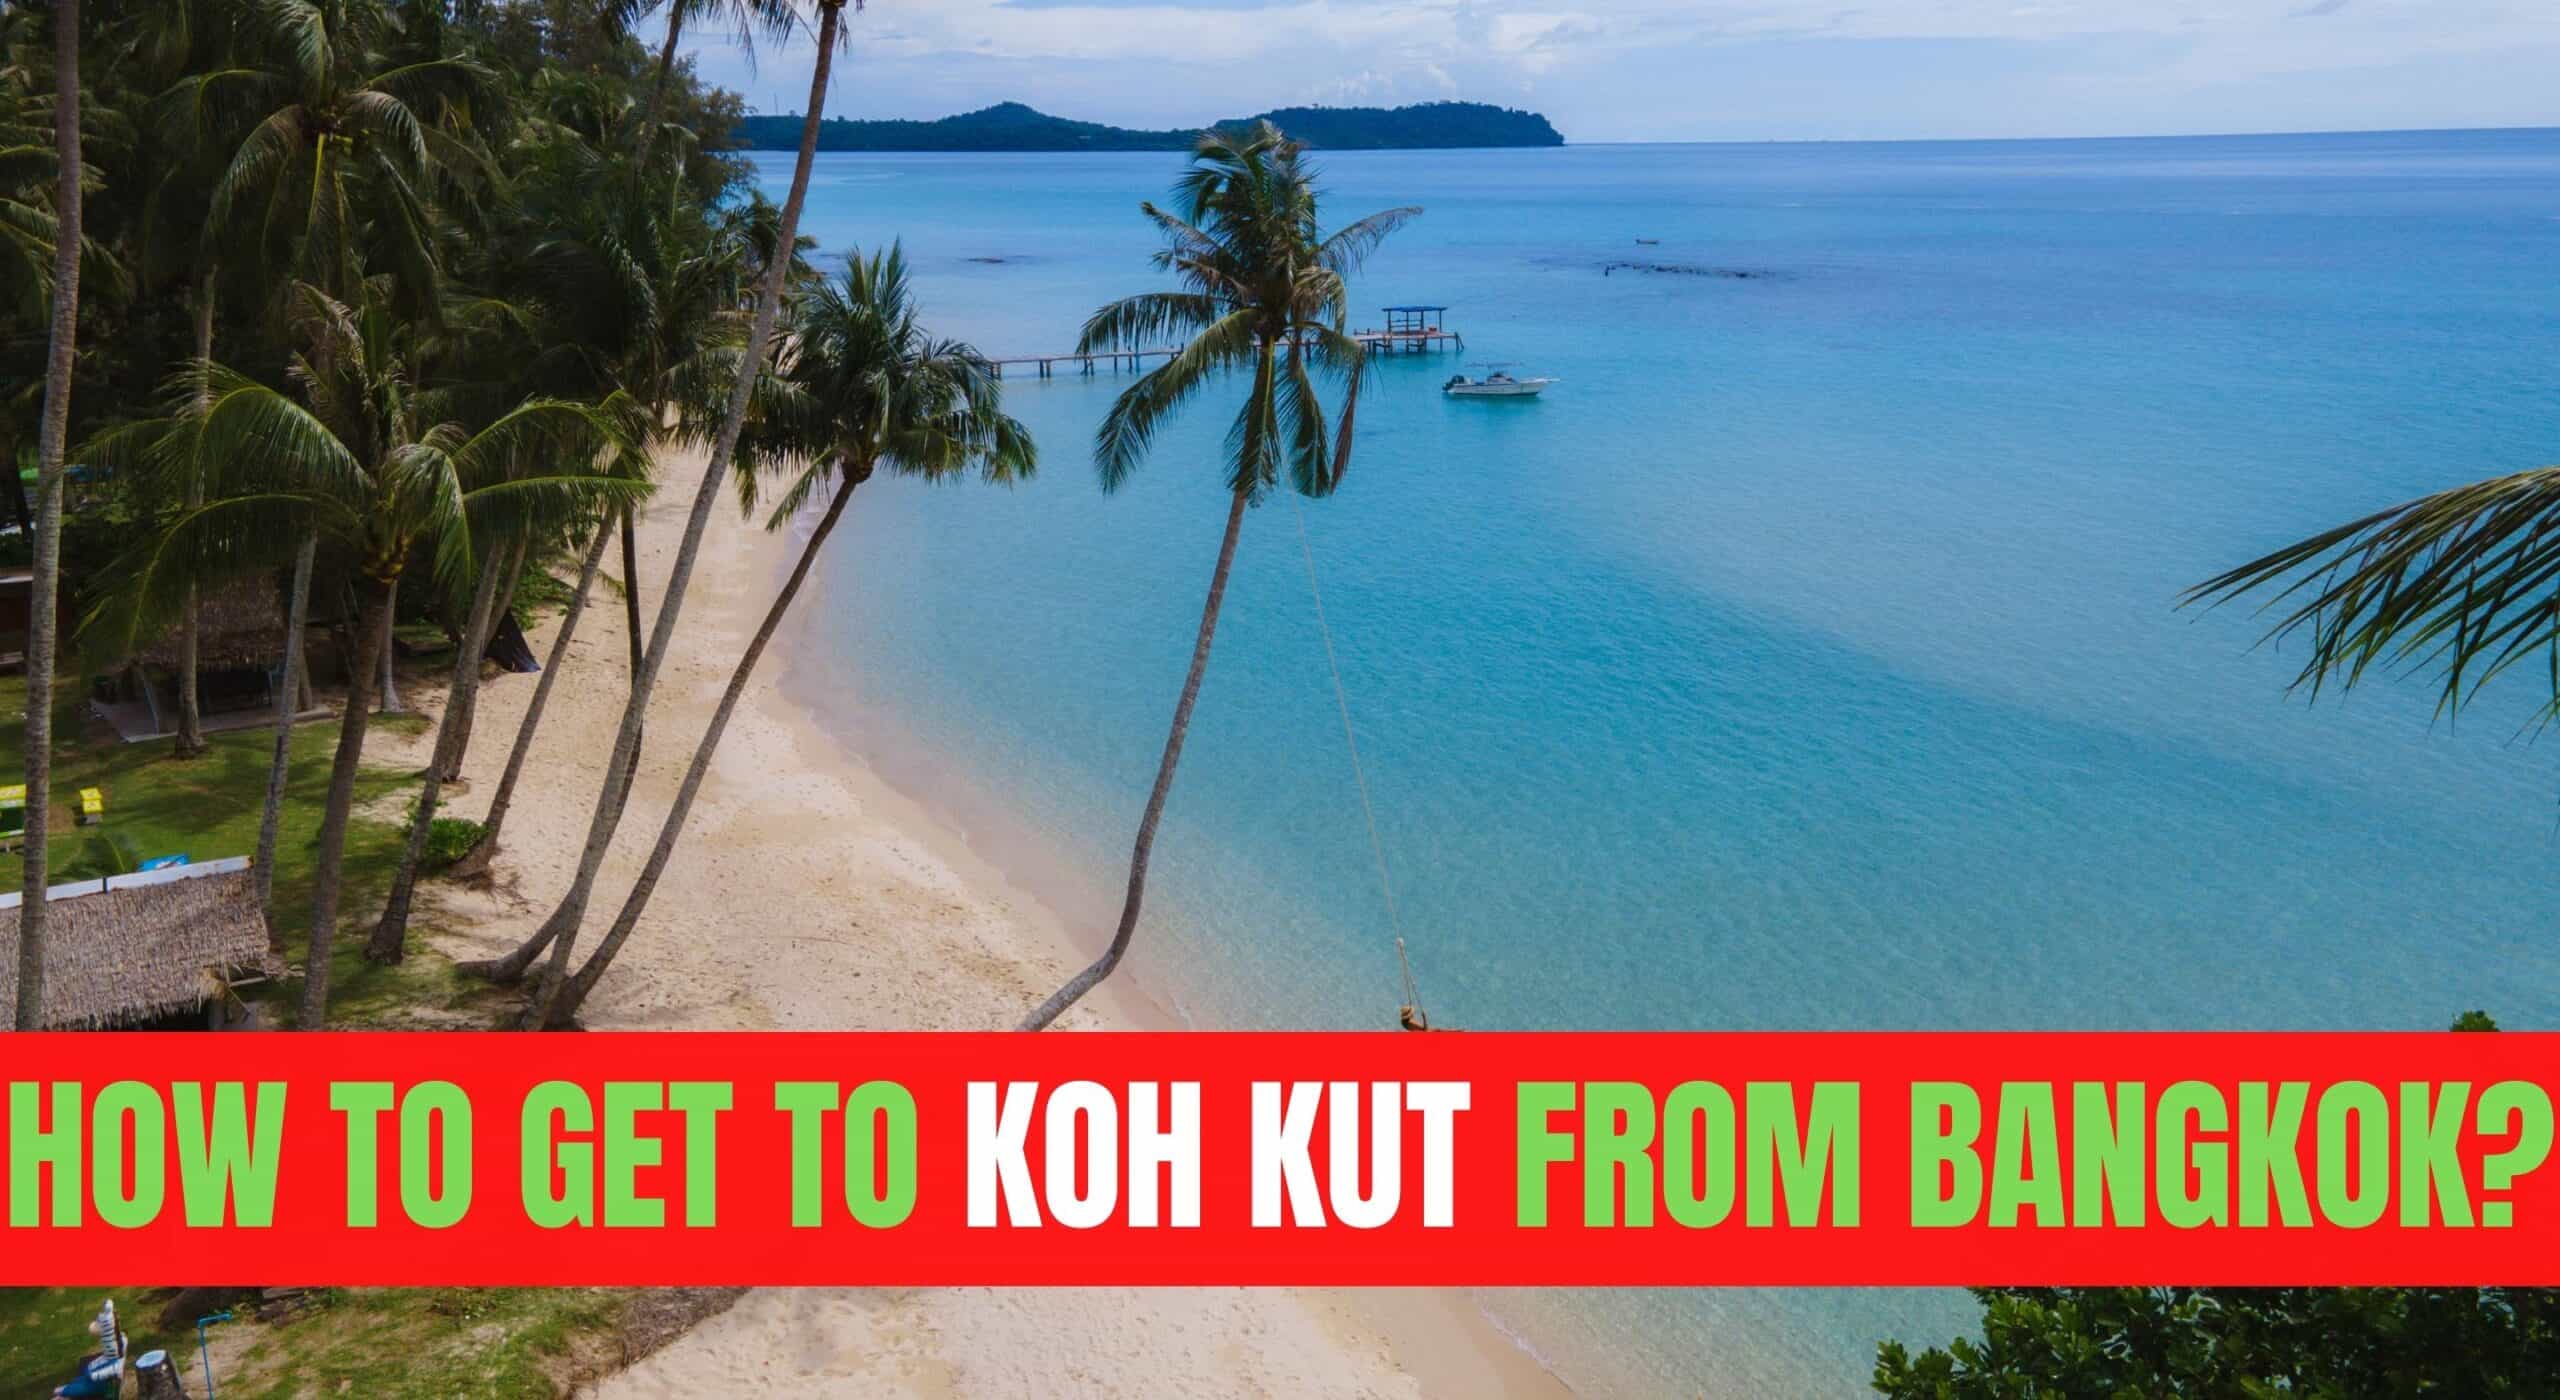 How to Get to Koh Kut from Bangkok?